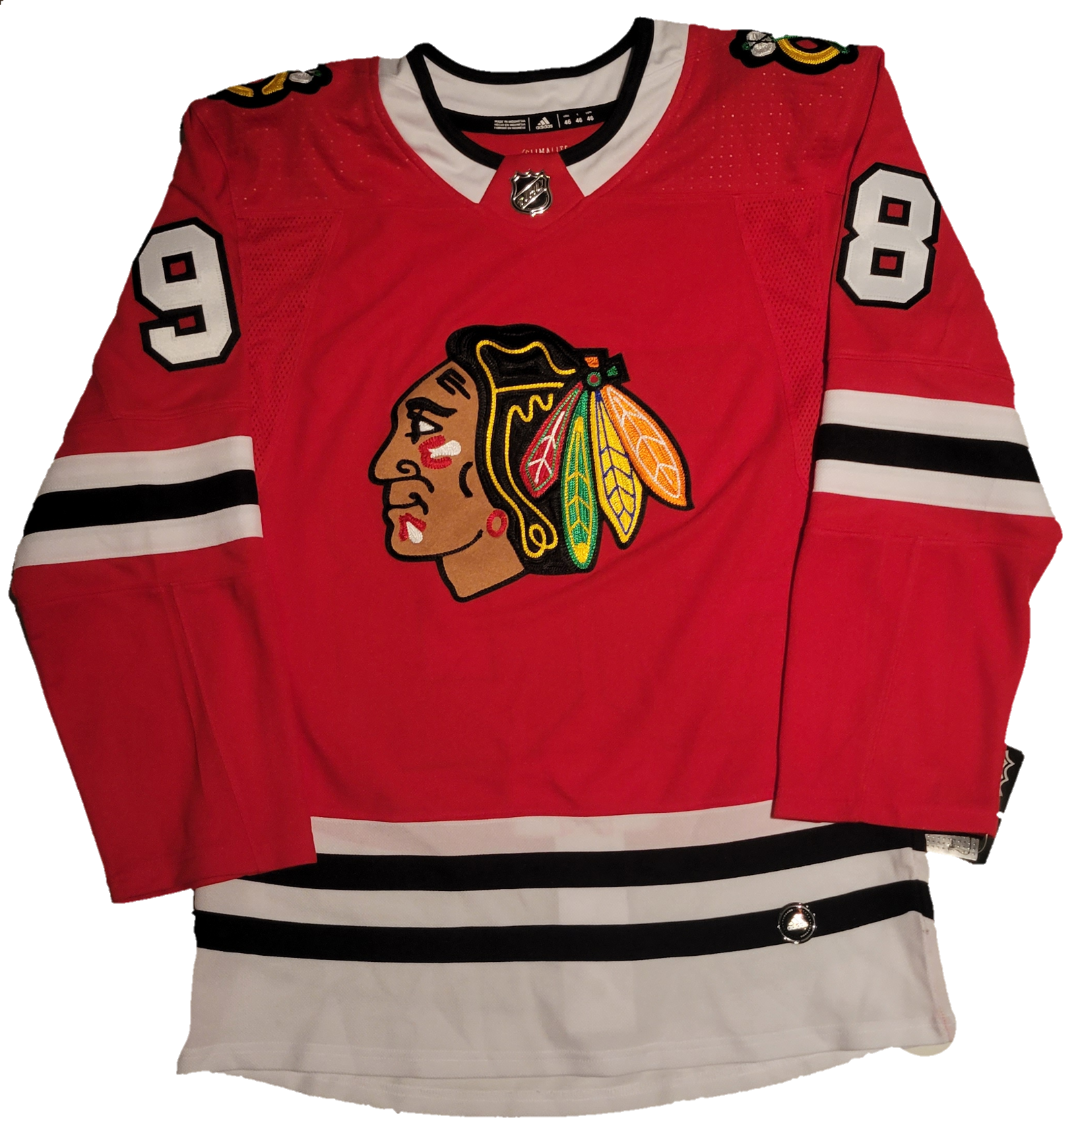 Large Connor Bedard #98 Chicago Blackhawks Adidas NHL home Jersey 52 NEW  w/TAGS